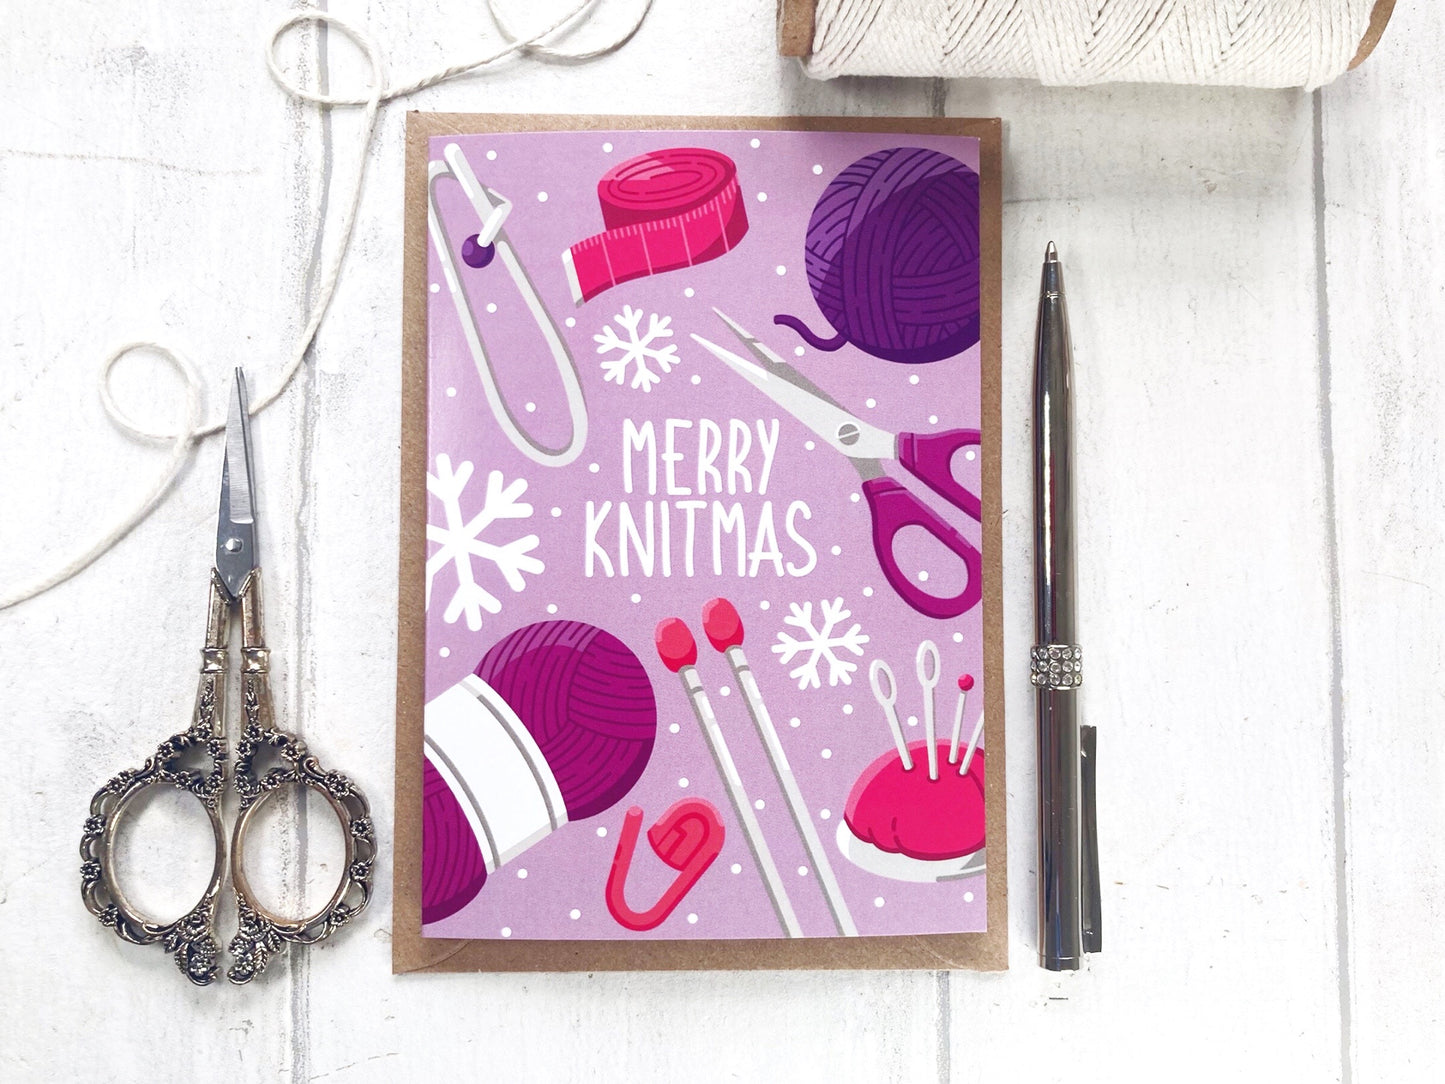 Xmas Knit - A6 Greetings Card by Little Green Stitches